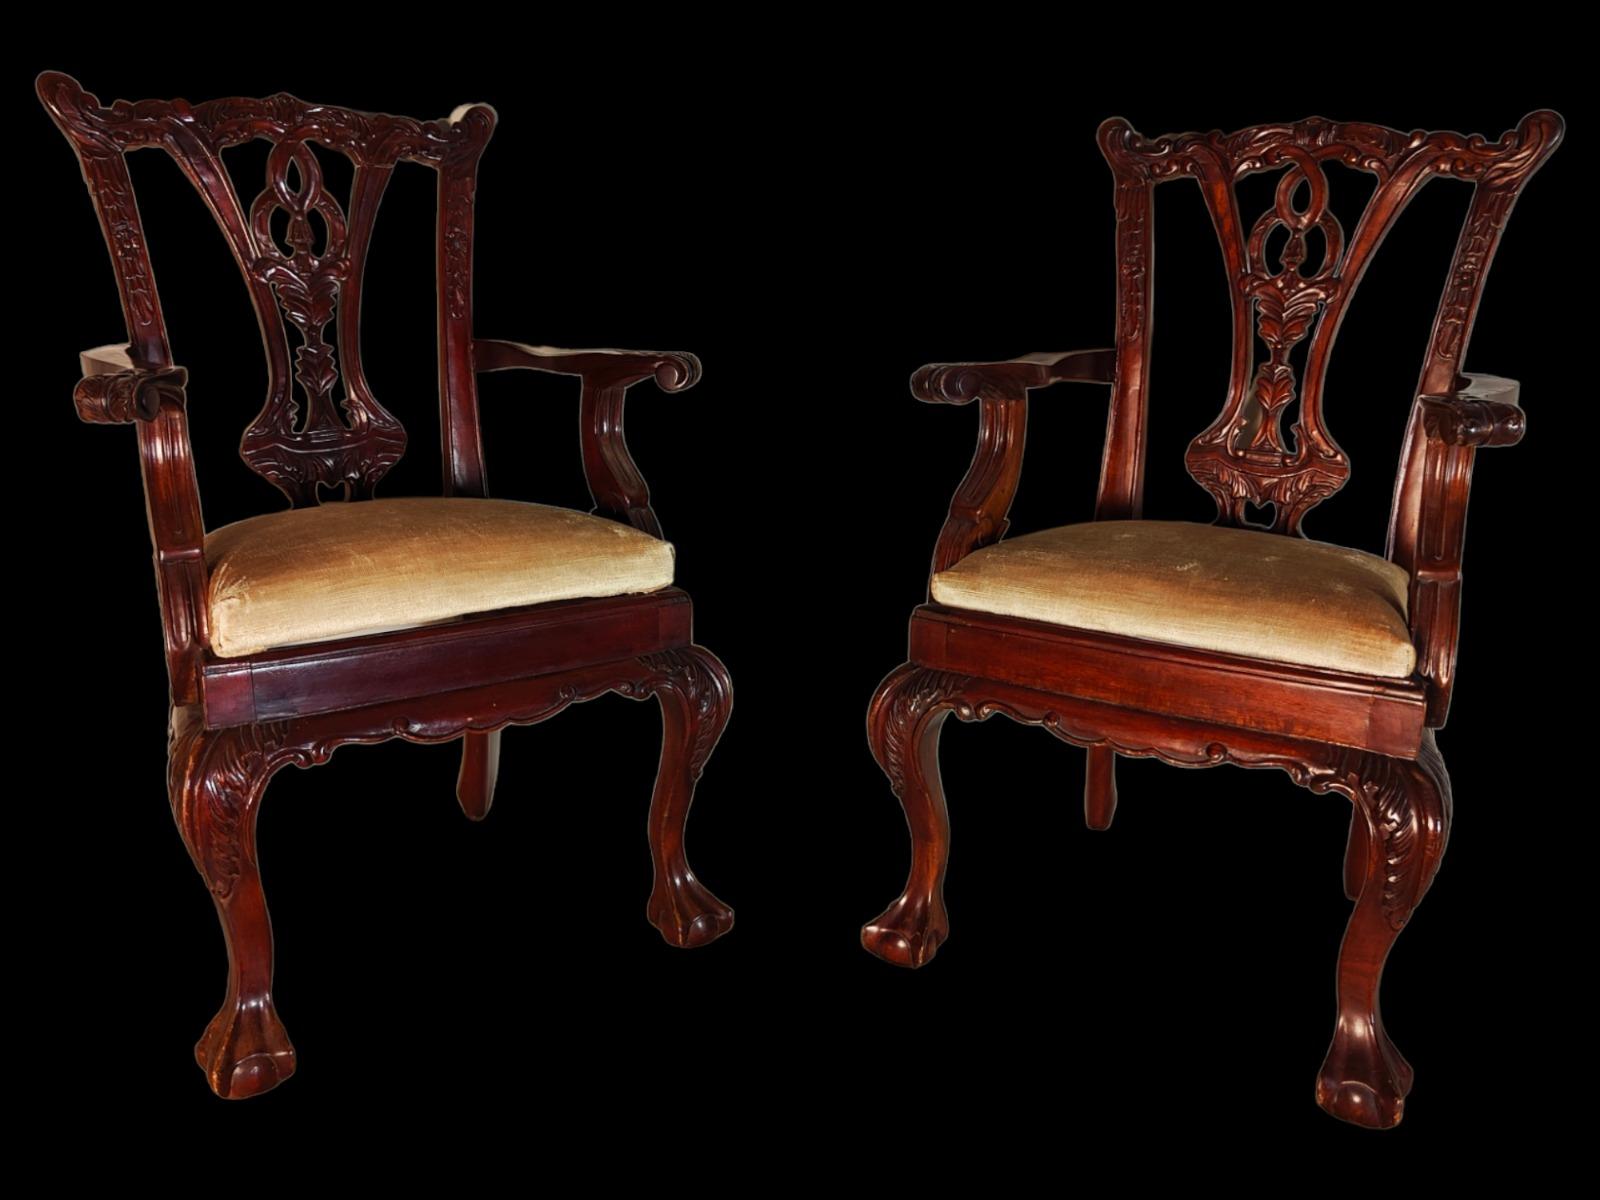 19th Century Miniature Chairs
CHAIRS POSSIBLY MADE FOR DOLLS OR SAMPLES FOR SALE. THEY ARE FROM THE XIX CENTURY MADE IN MAHOGANY. VERY GOOD STATE. MEASUREMENT: 65X37X40CM
